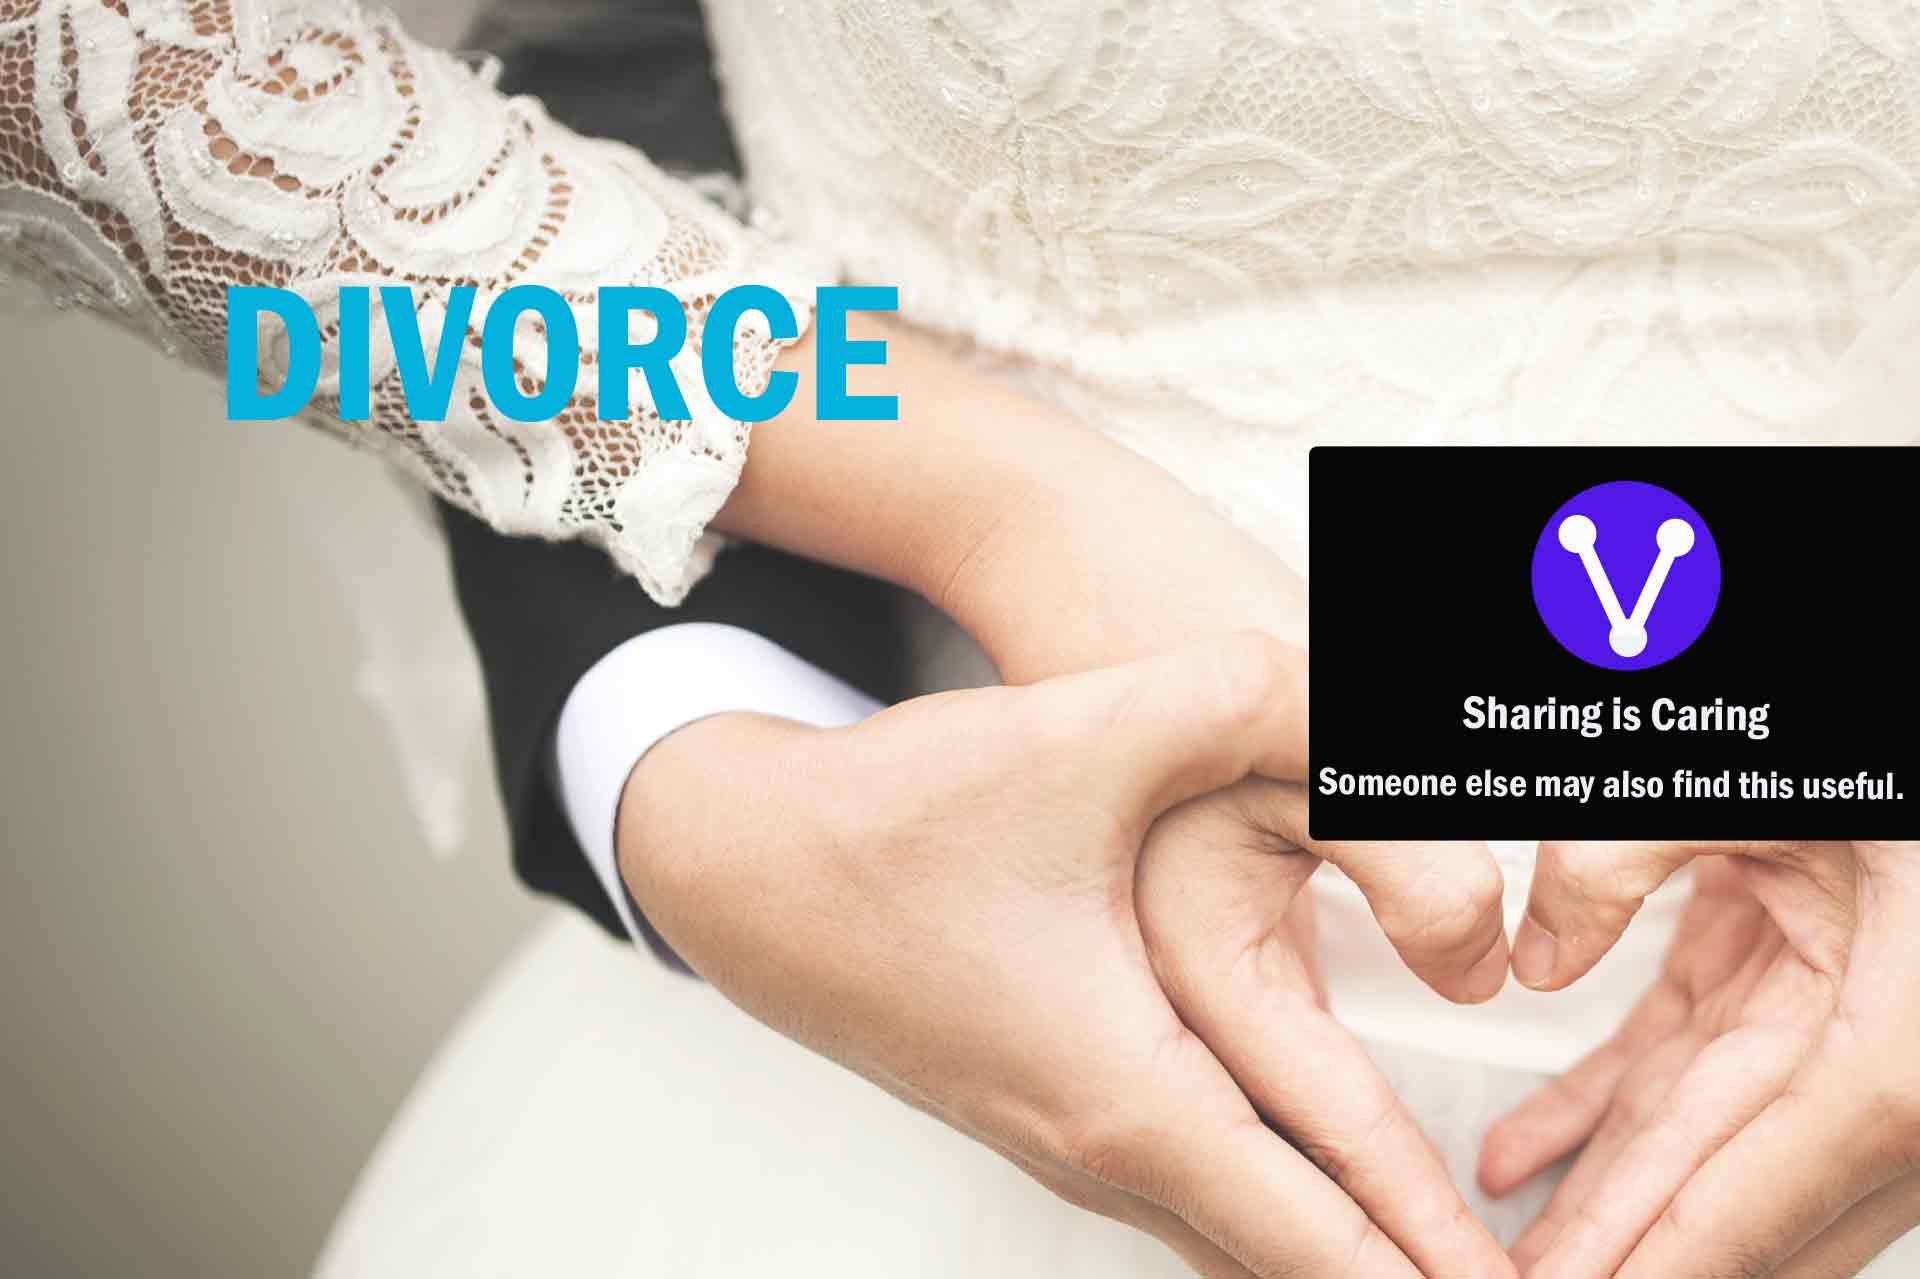 Divorce Services and Advice